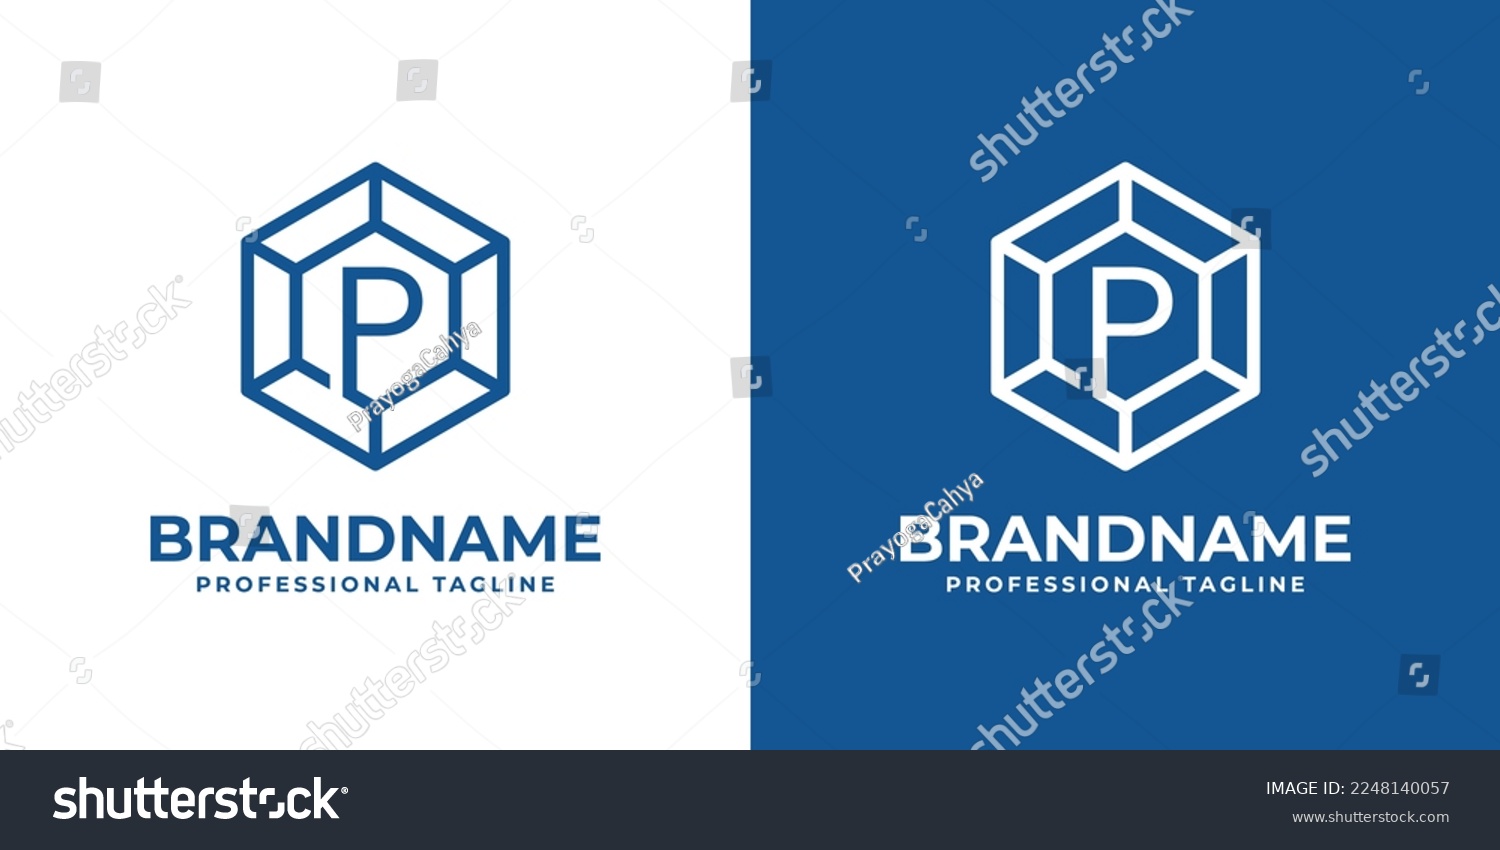 SVG of Initial P Hexagon Diamond Logo, suitable for any business with P initial. svg